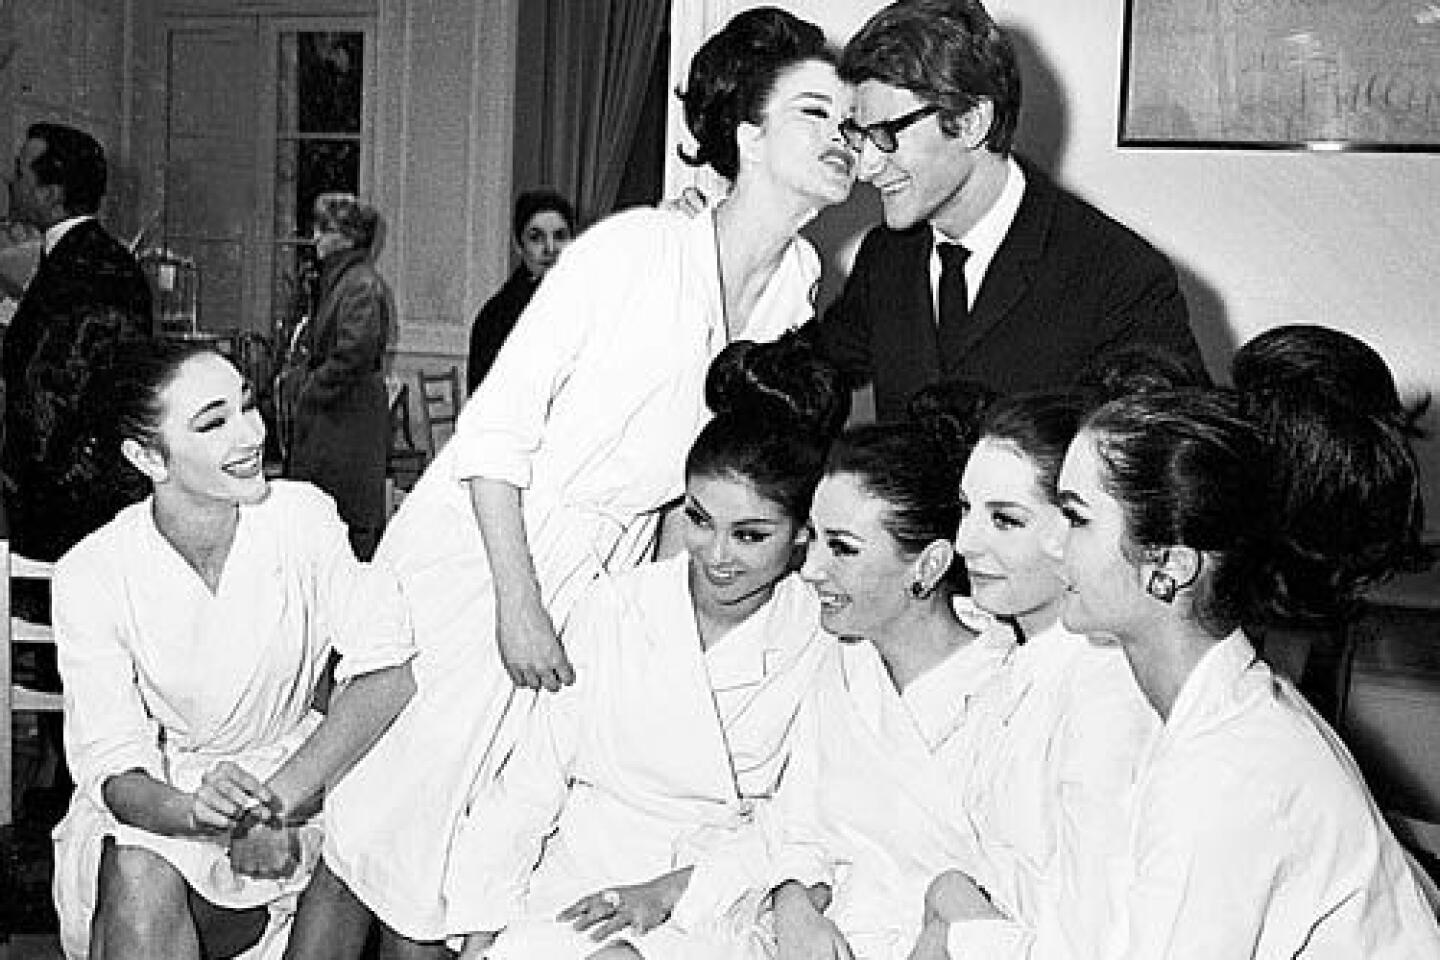 Yves Saint Laurent, 71; icon of French fashion design - Los